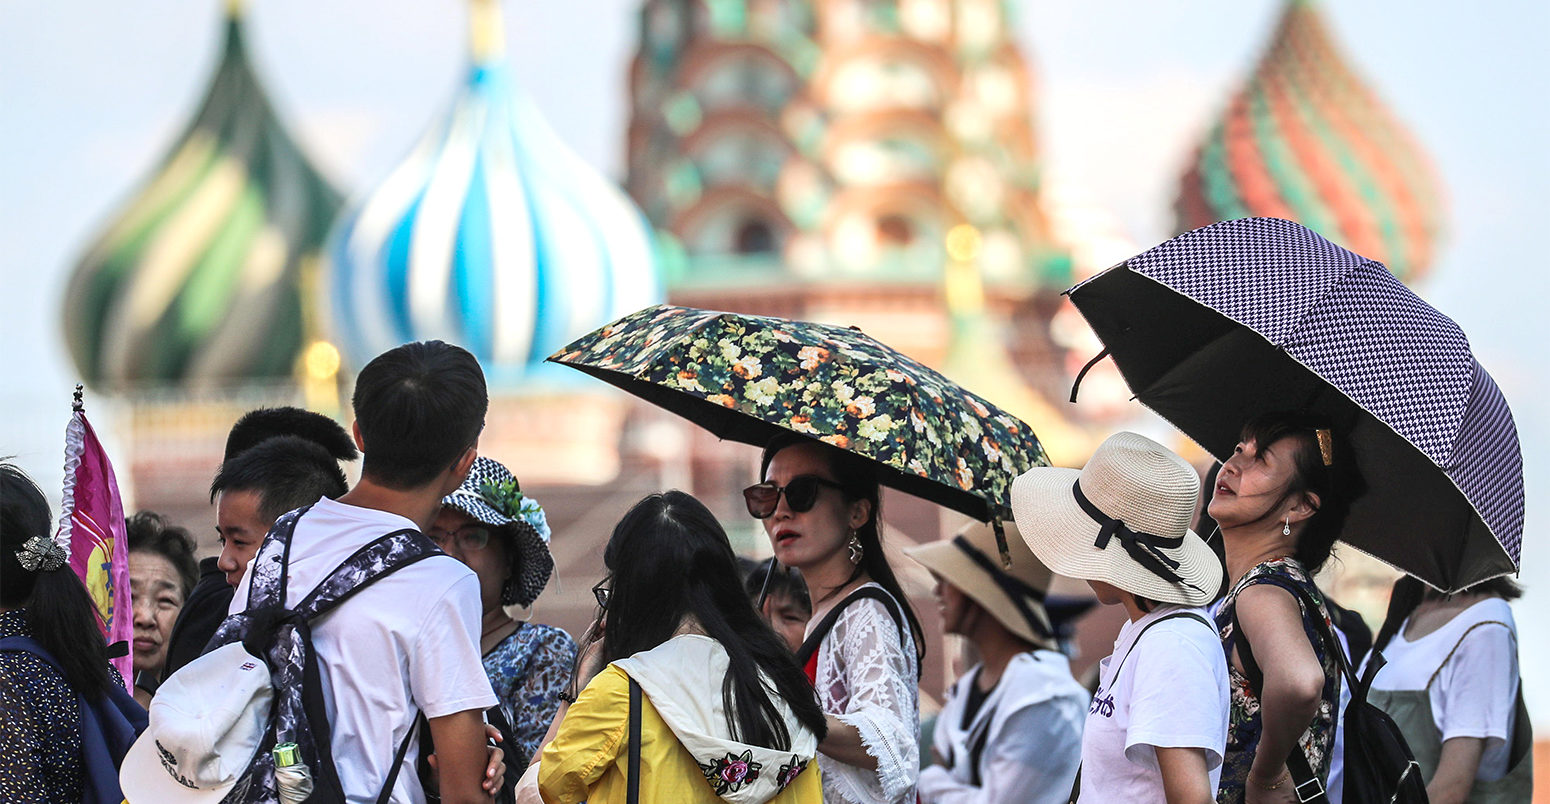 People take shelter under umbrellas during a heatwave in Moscow, 3 August 2018. Credit: ITAR-TASS News Agency / Alamy Stock Photo.